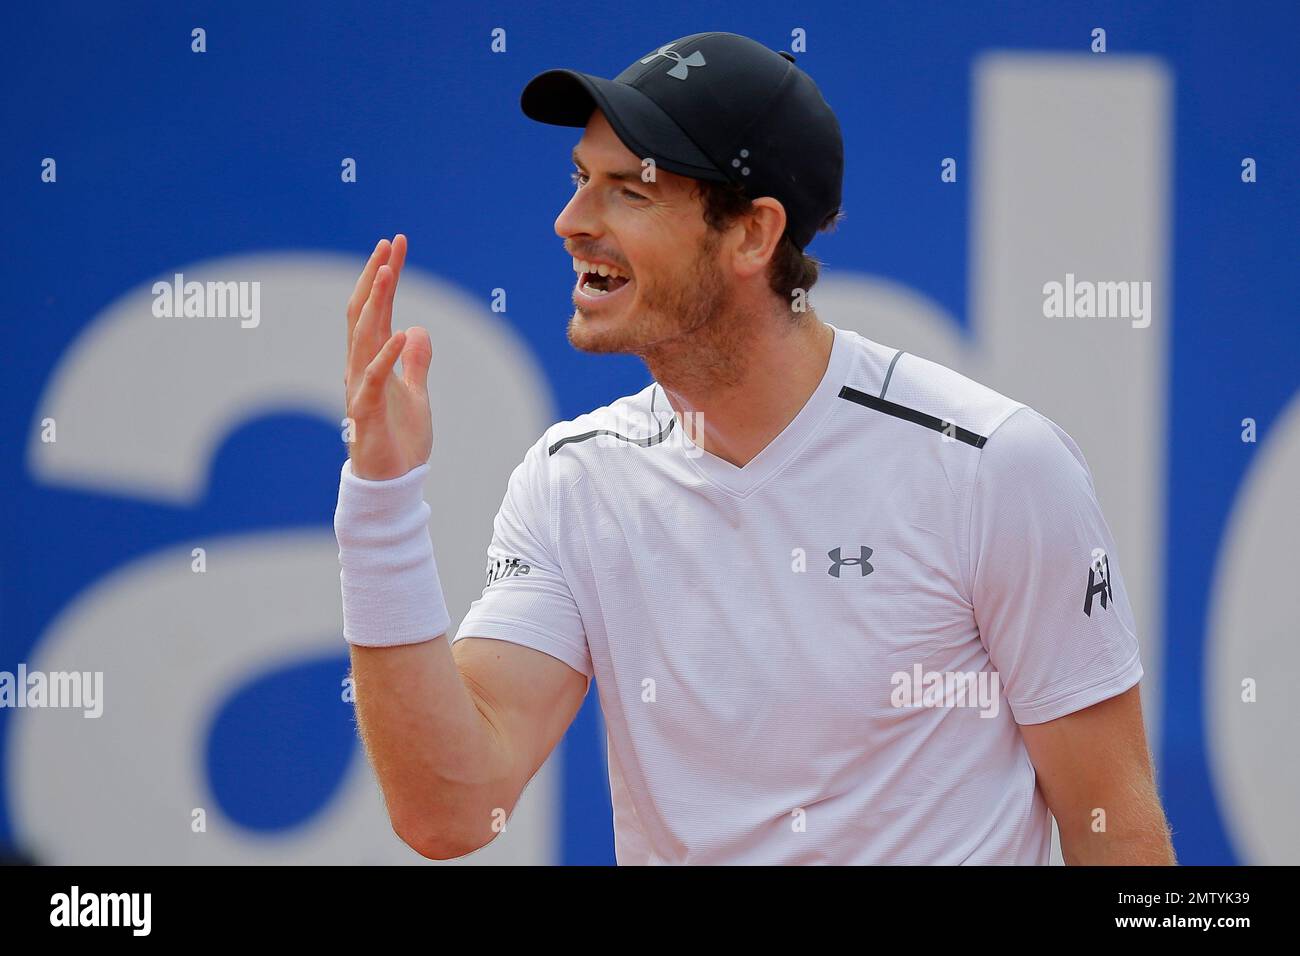 Andy Murray of Britain reacts during his match against Dominic Thiem of Austria in a semifinal match at the Barcelona Open Tennis Tournament in Barcelona, Spain, Saturday, April 29, 2017